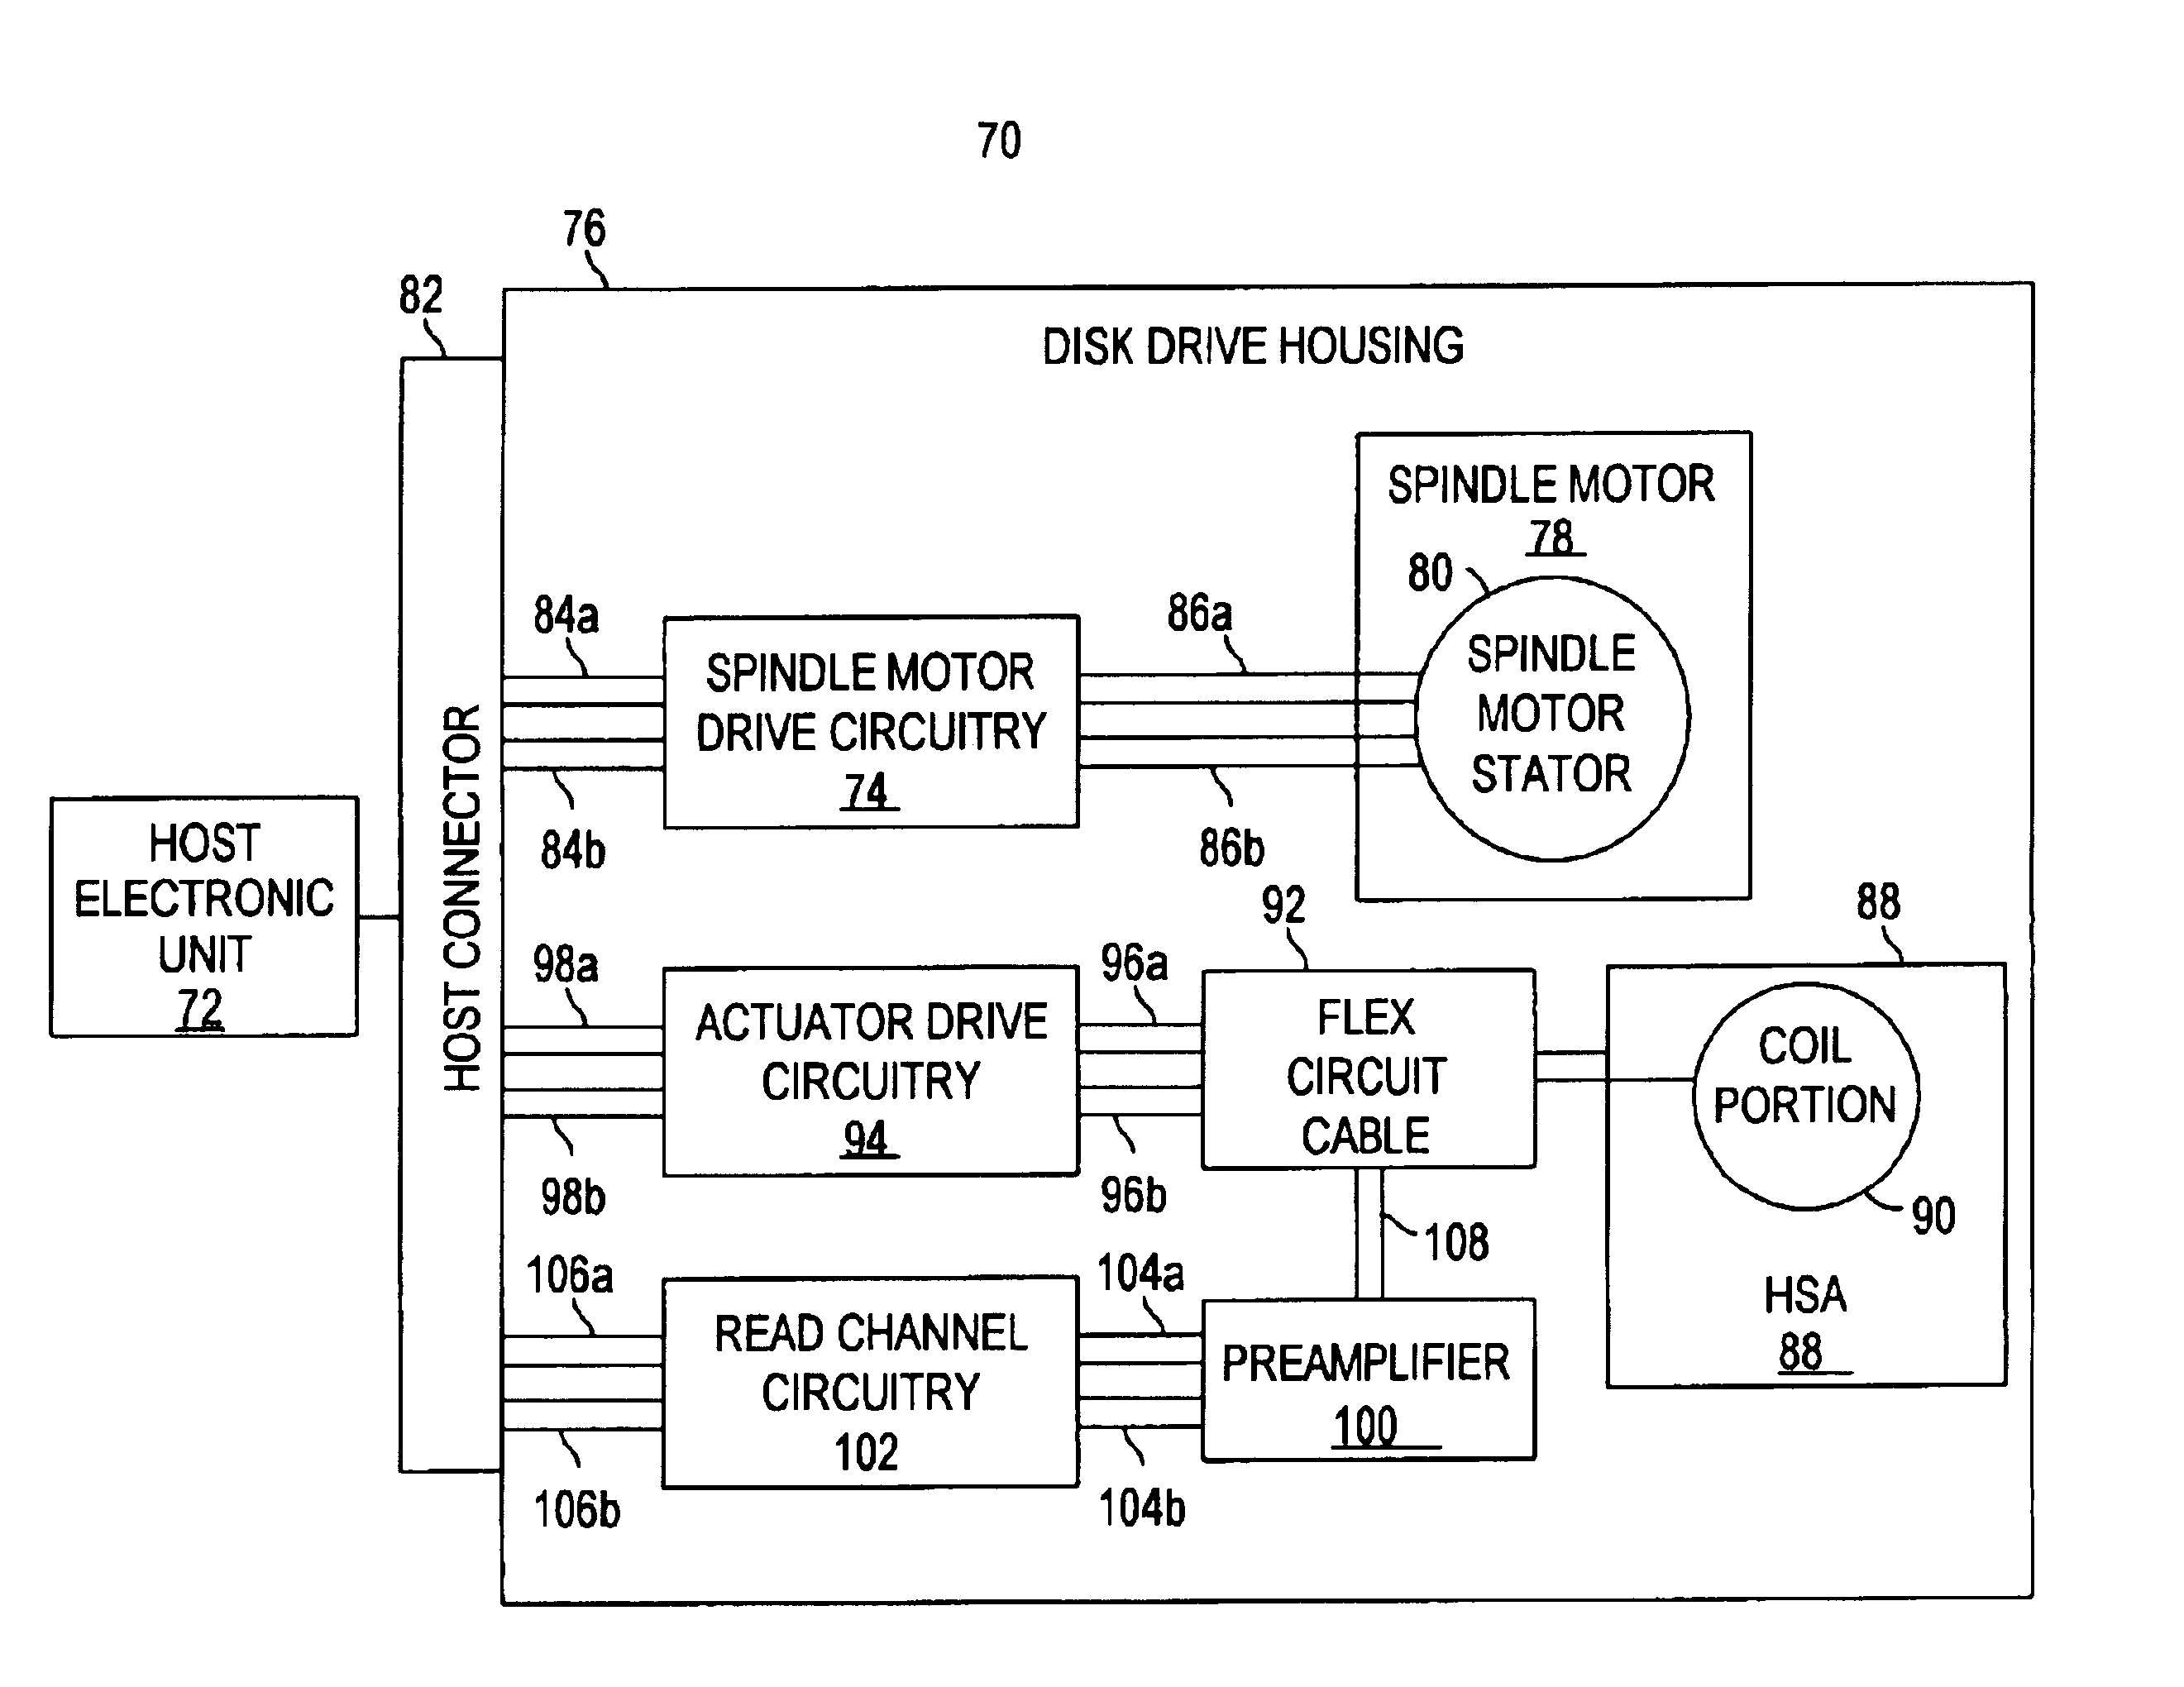 Disk drive including electrical traces integrally formed upon disk drive housing